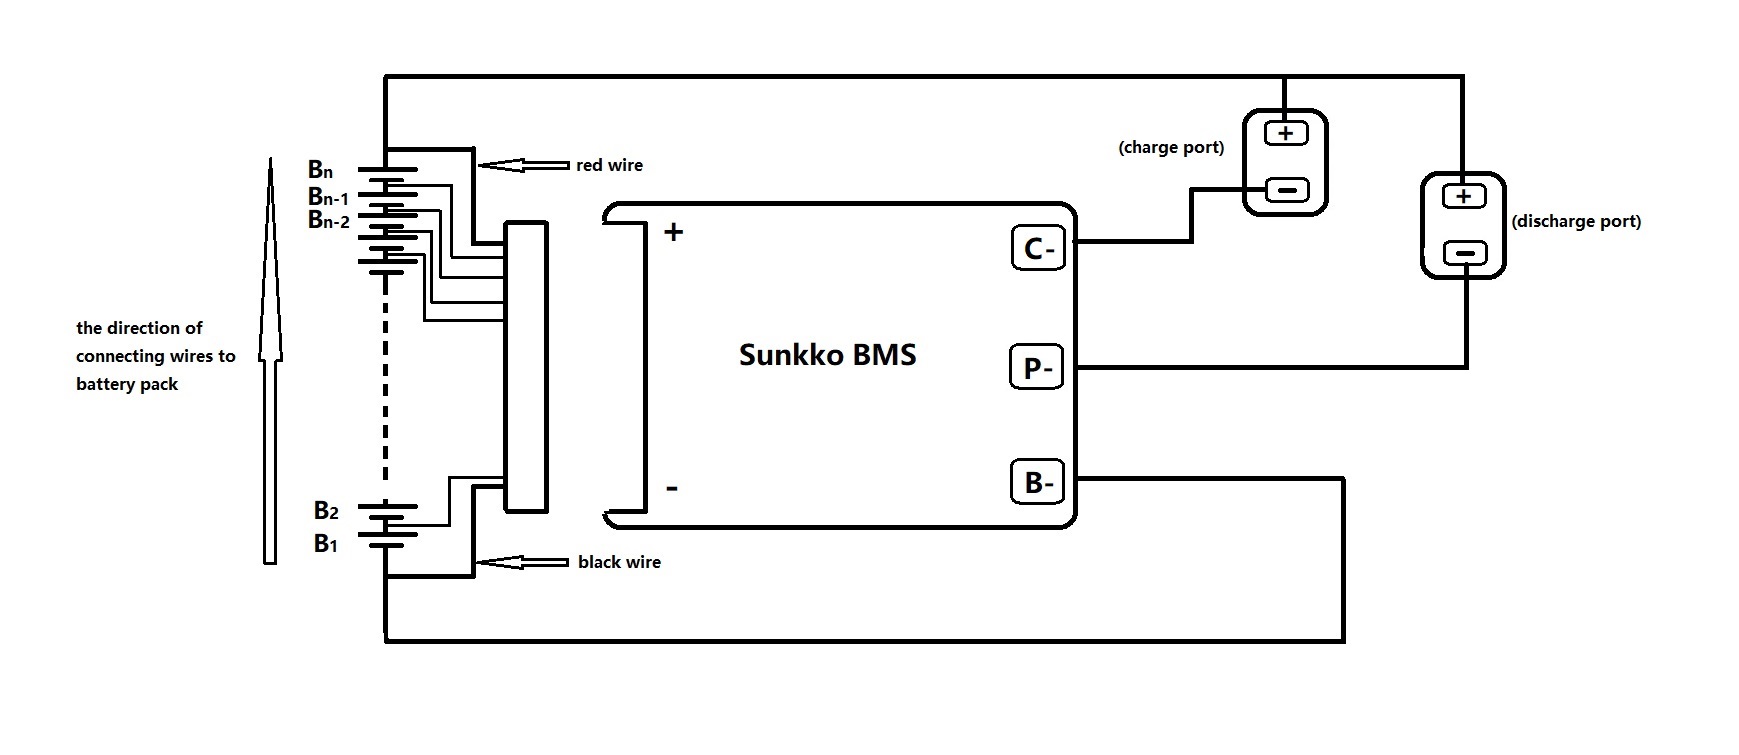 Two types of BMSs and each wiring diagram - Sunkko Electrical Lighting Sunkko